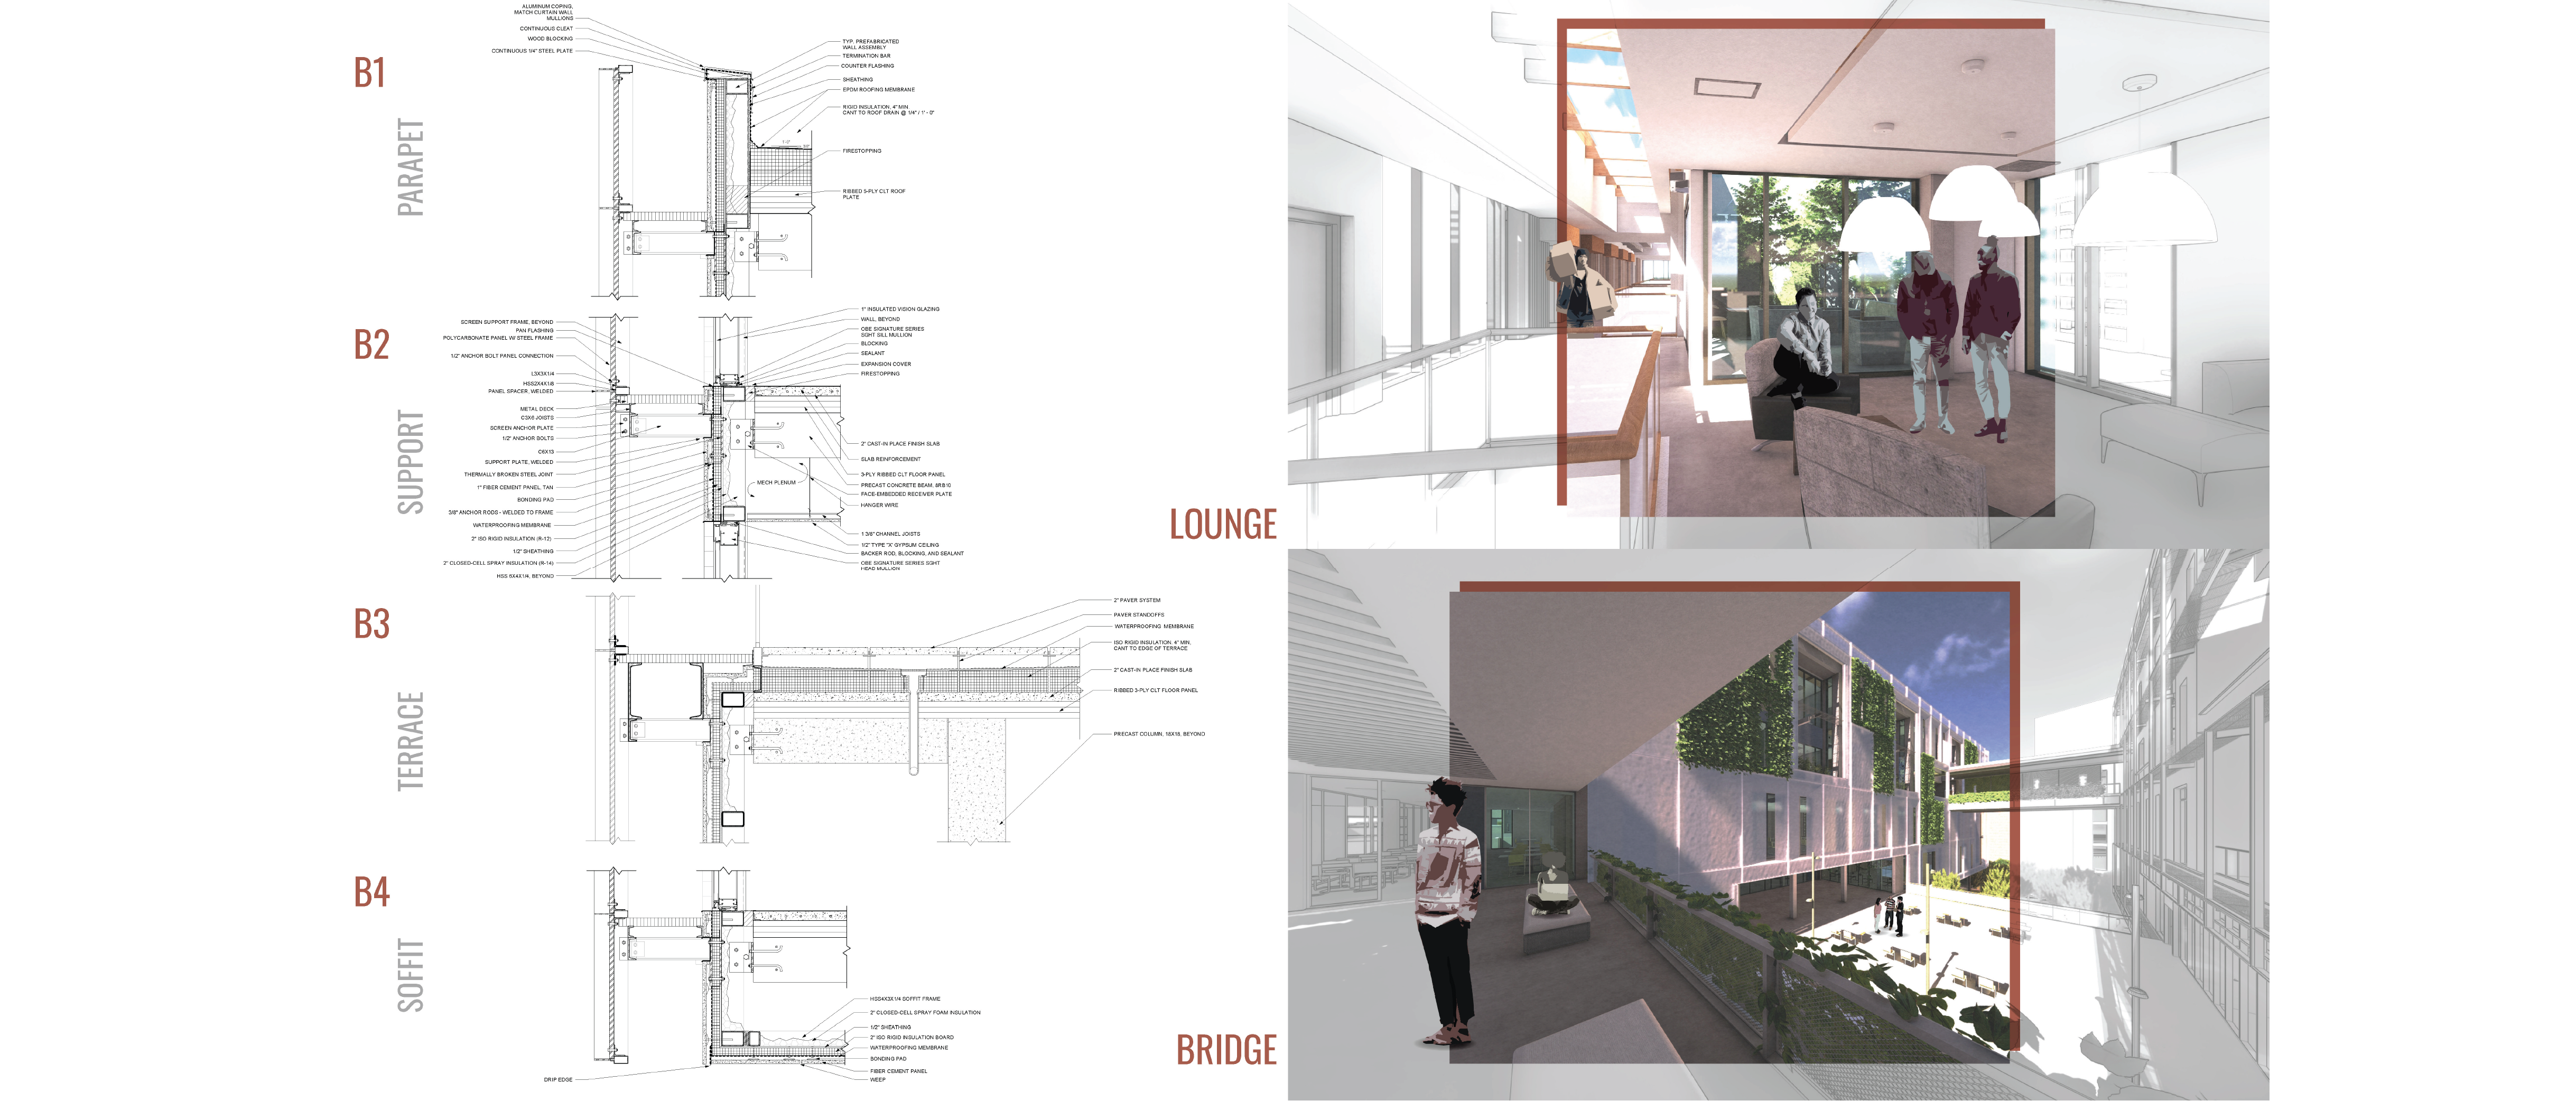 The Sanctuary | Mady Bellanca & Hayden Duncan | ARCH 8920 | Professors Albright, Heine and Ersoy